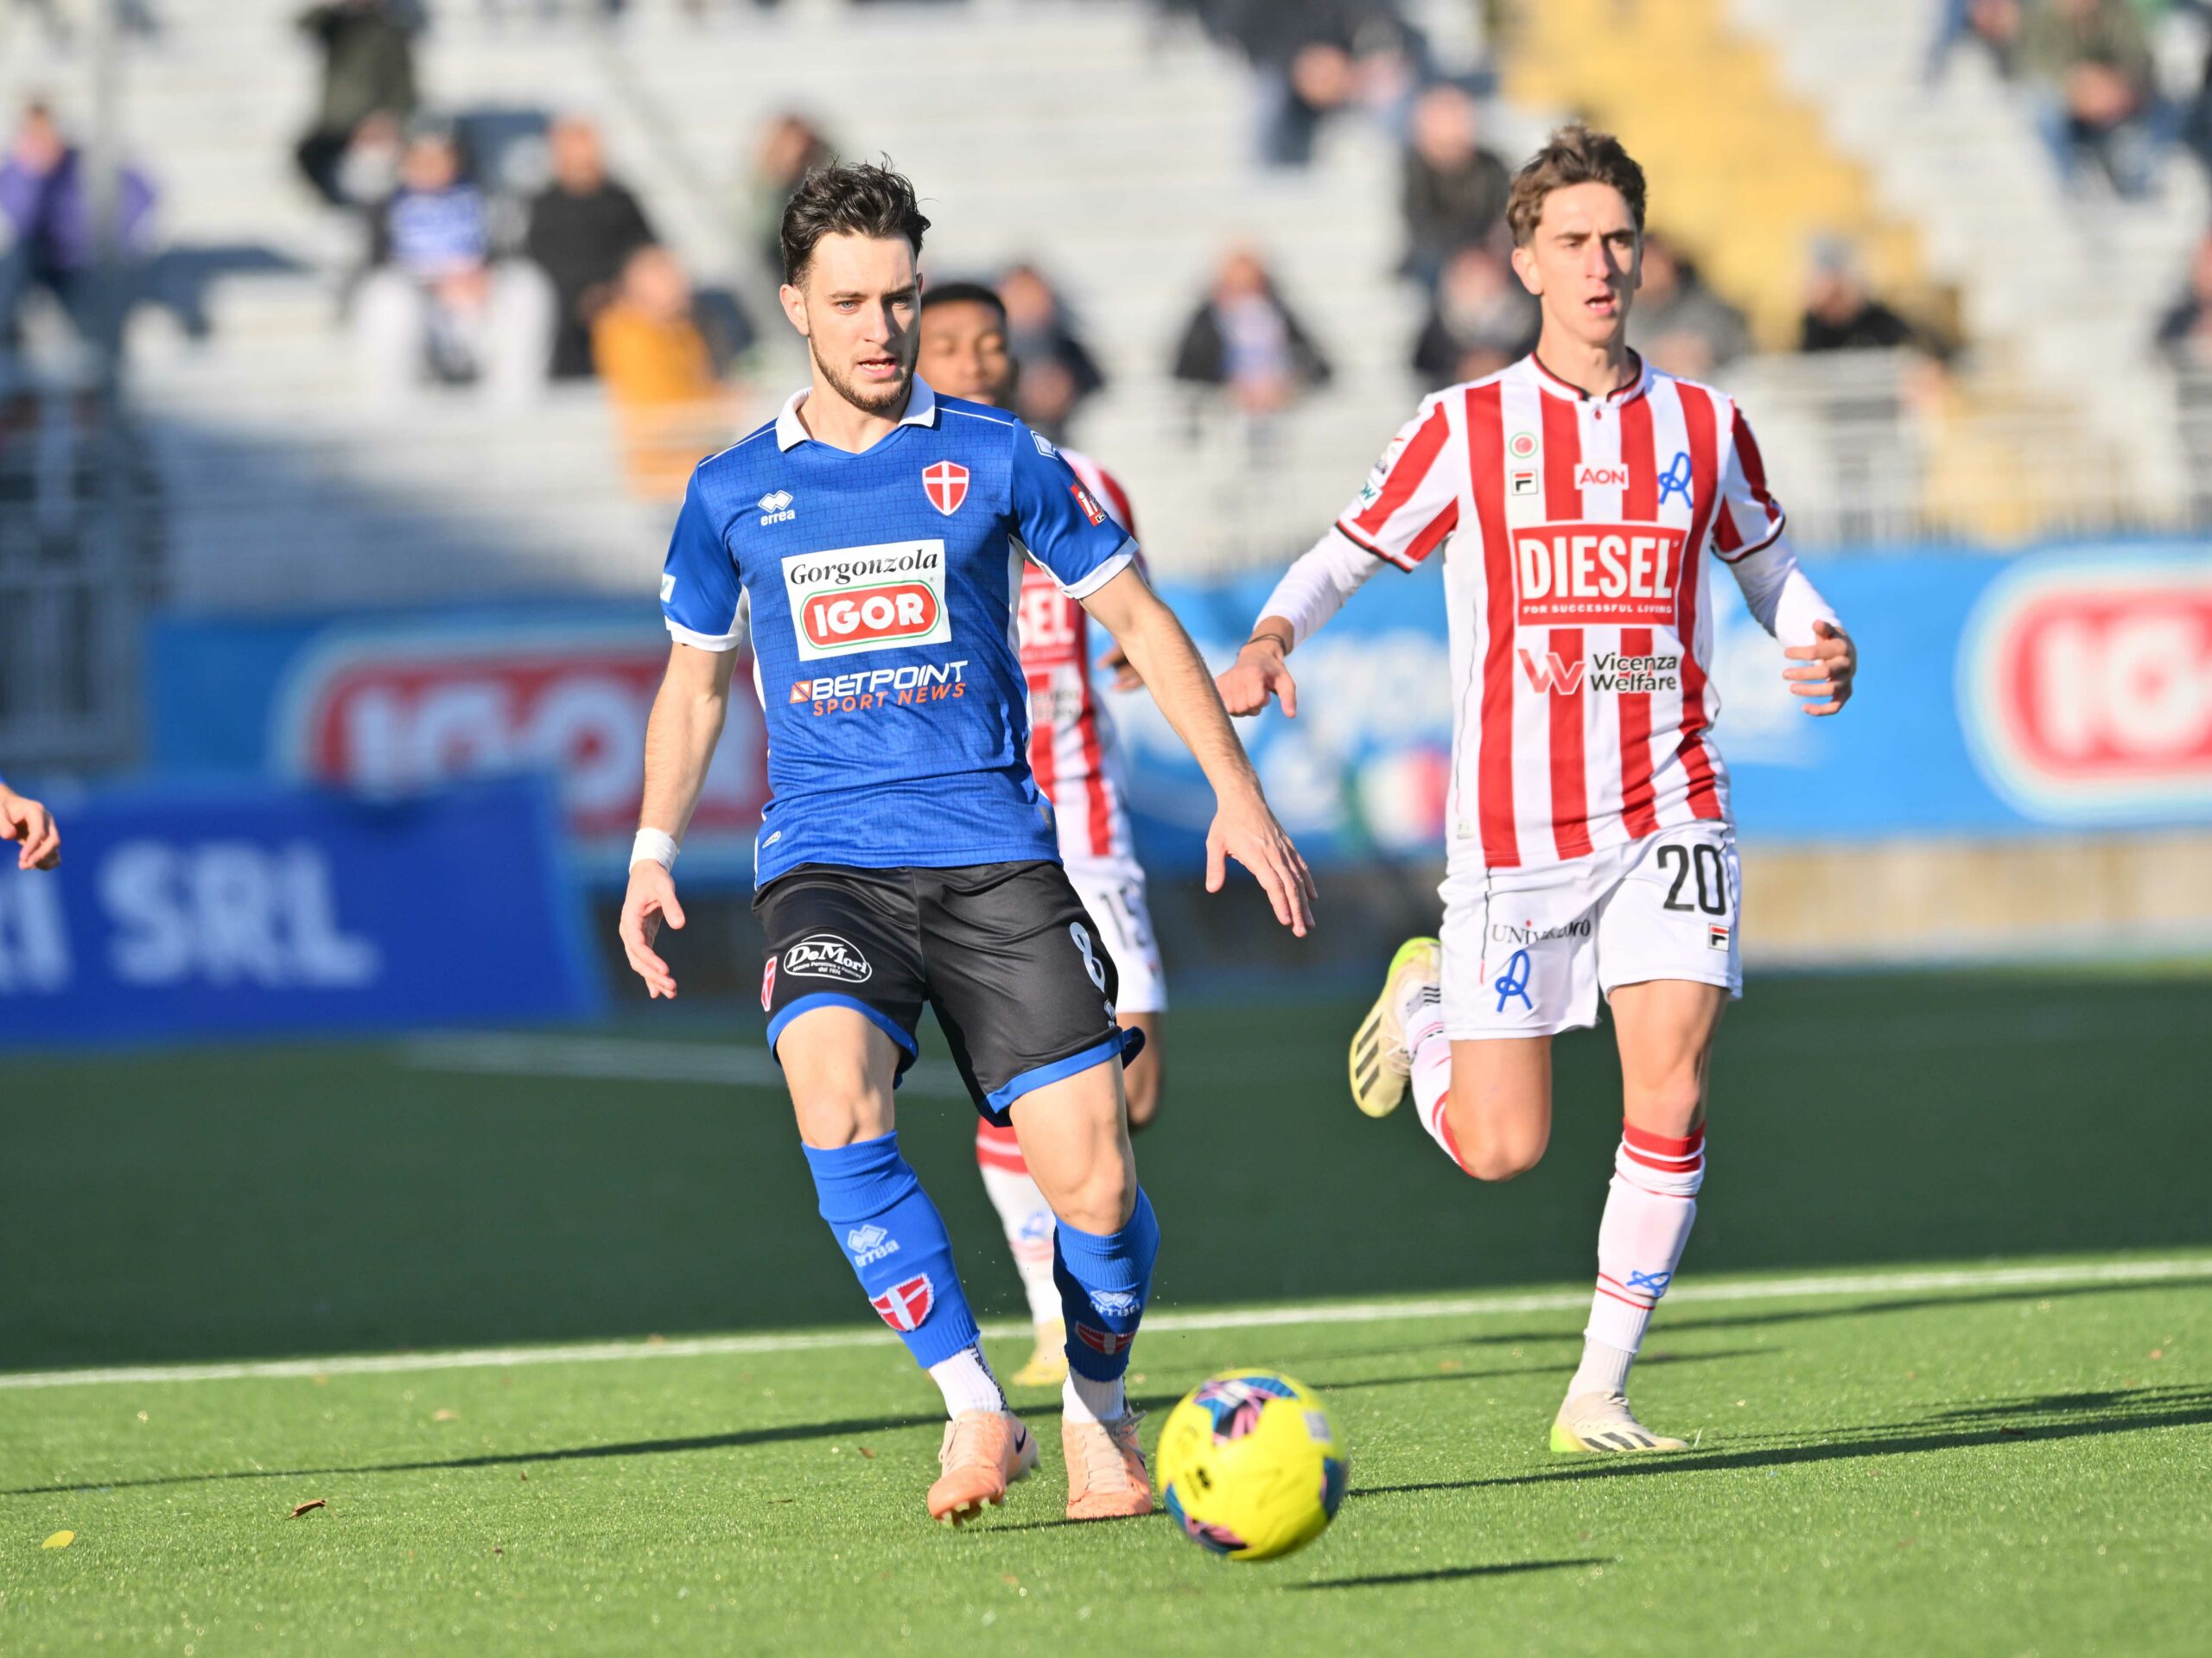 Read more about the article Novara-Vicenza 2-2 | Tabellino del match